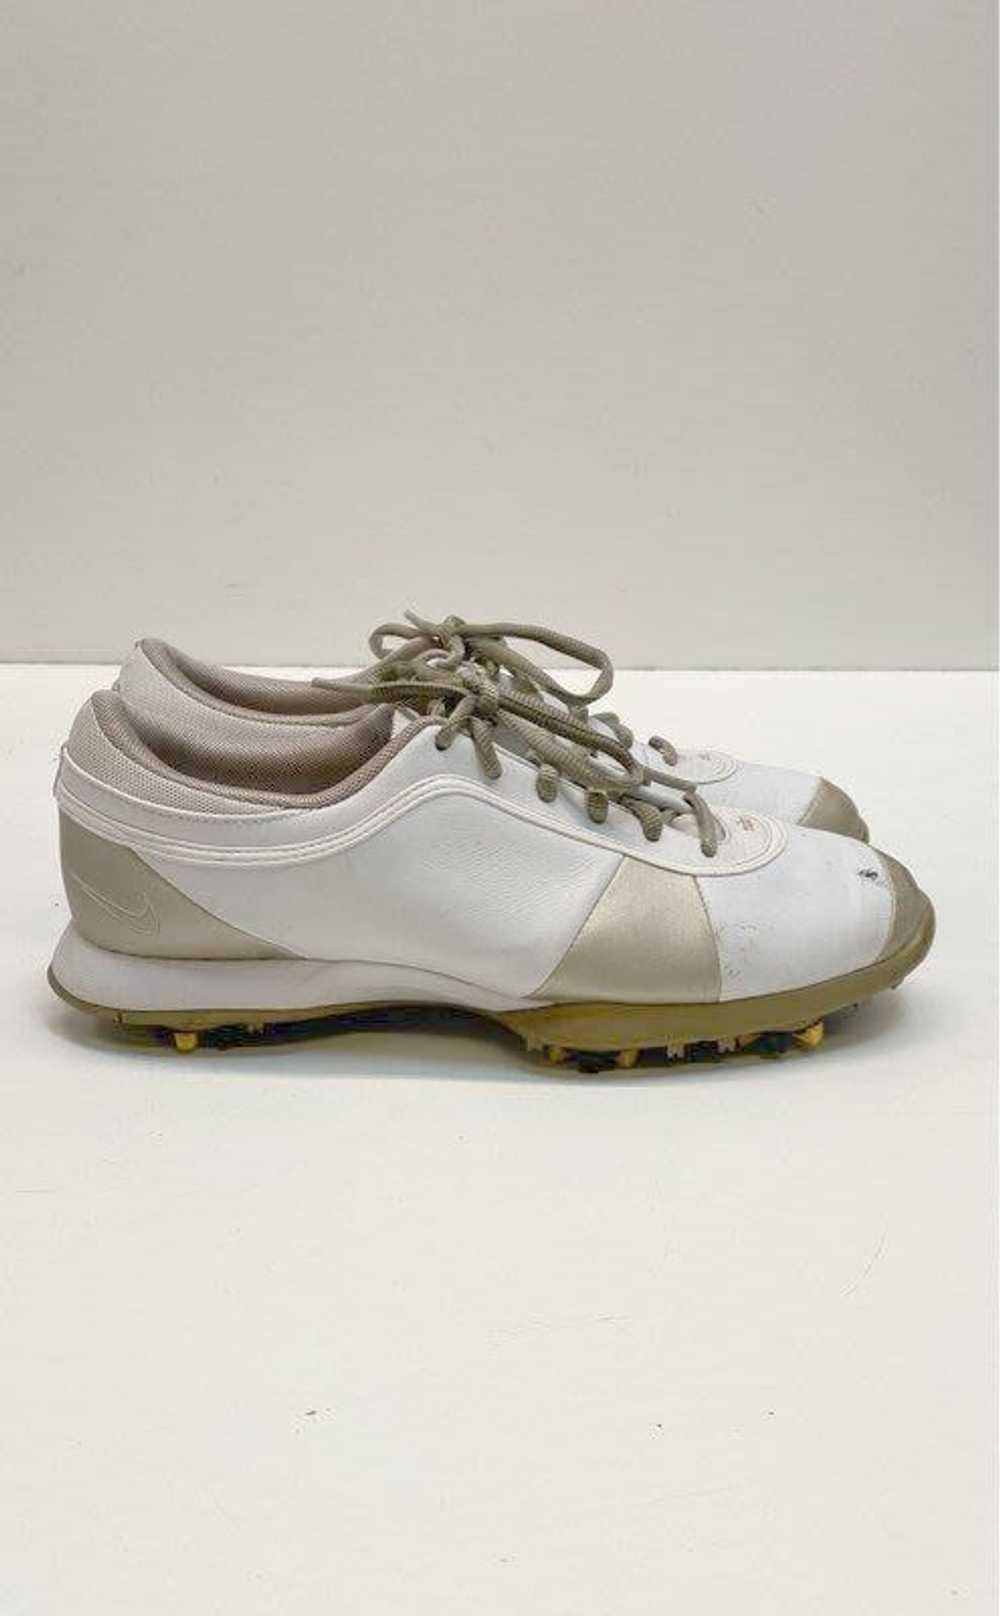 Nike Air Golf Sneakers Size Women 7.5 - image 1